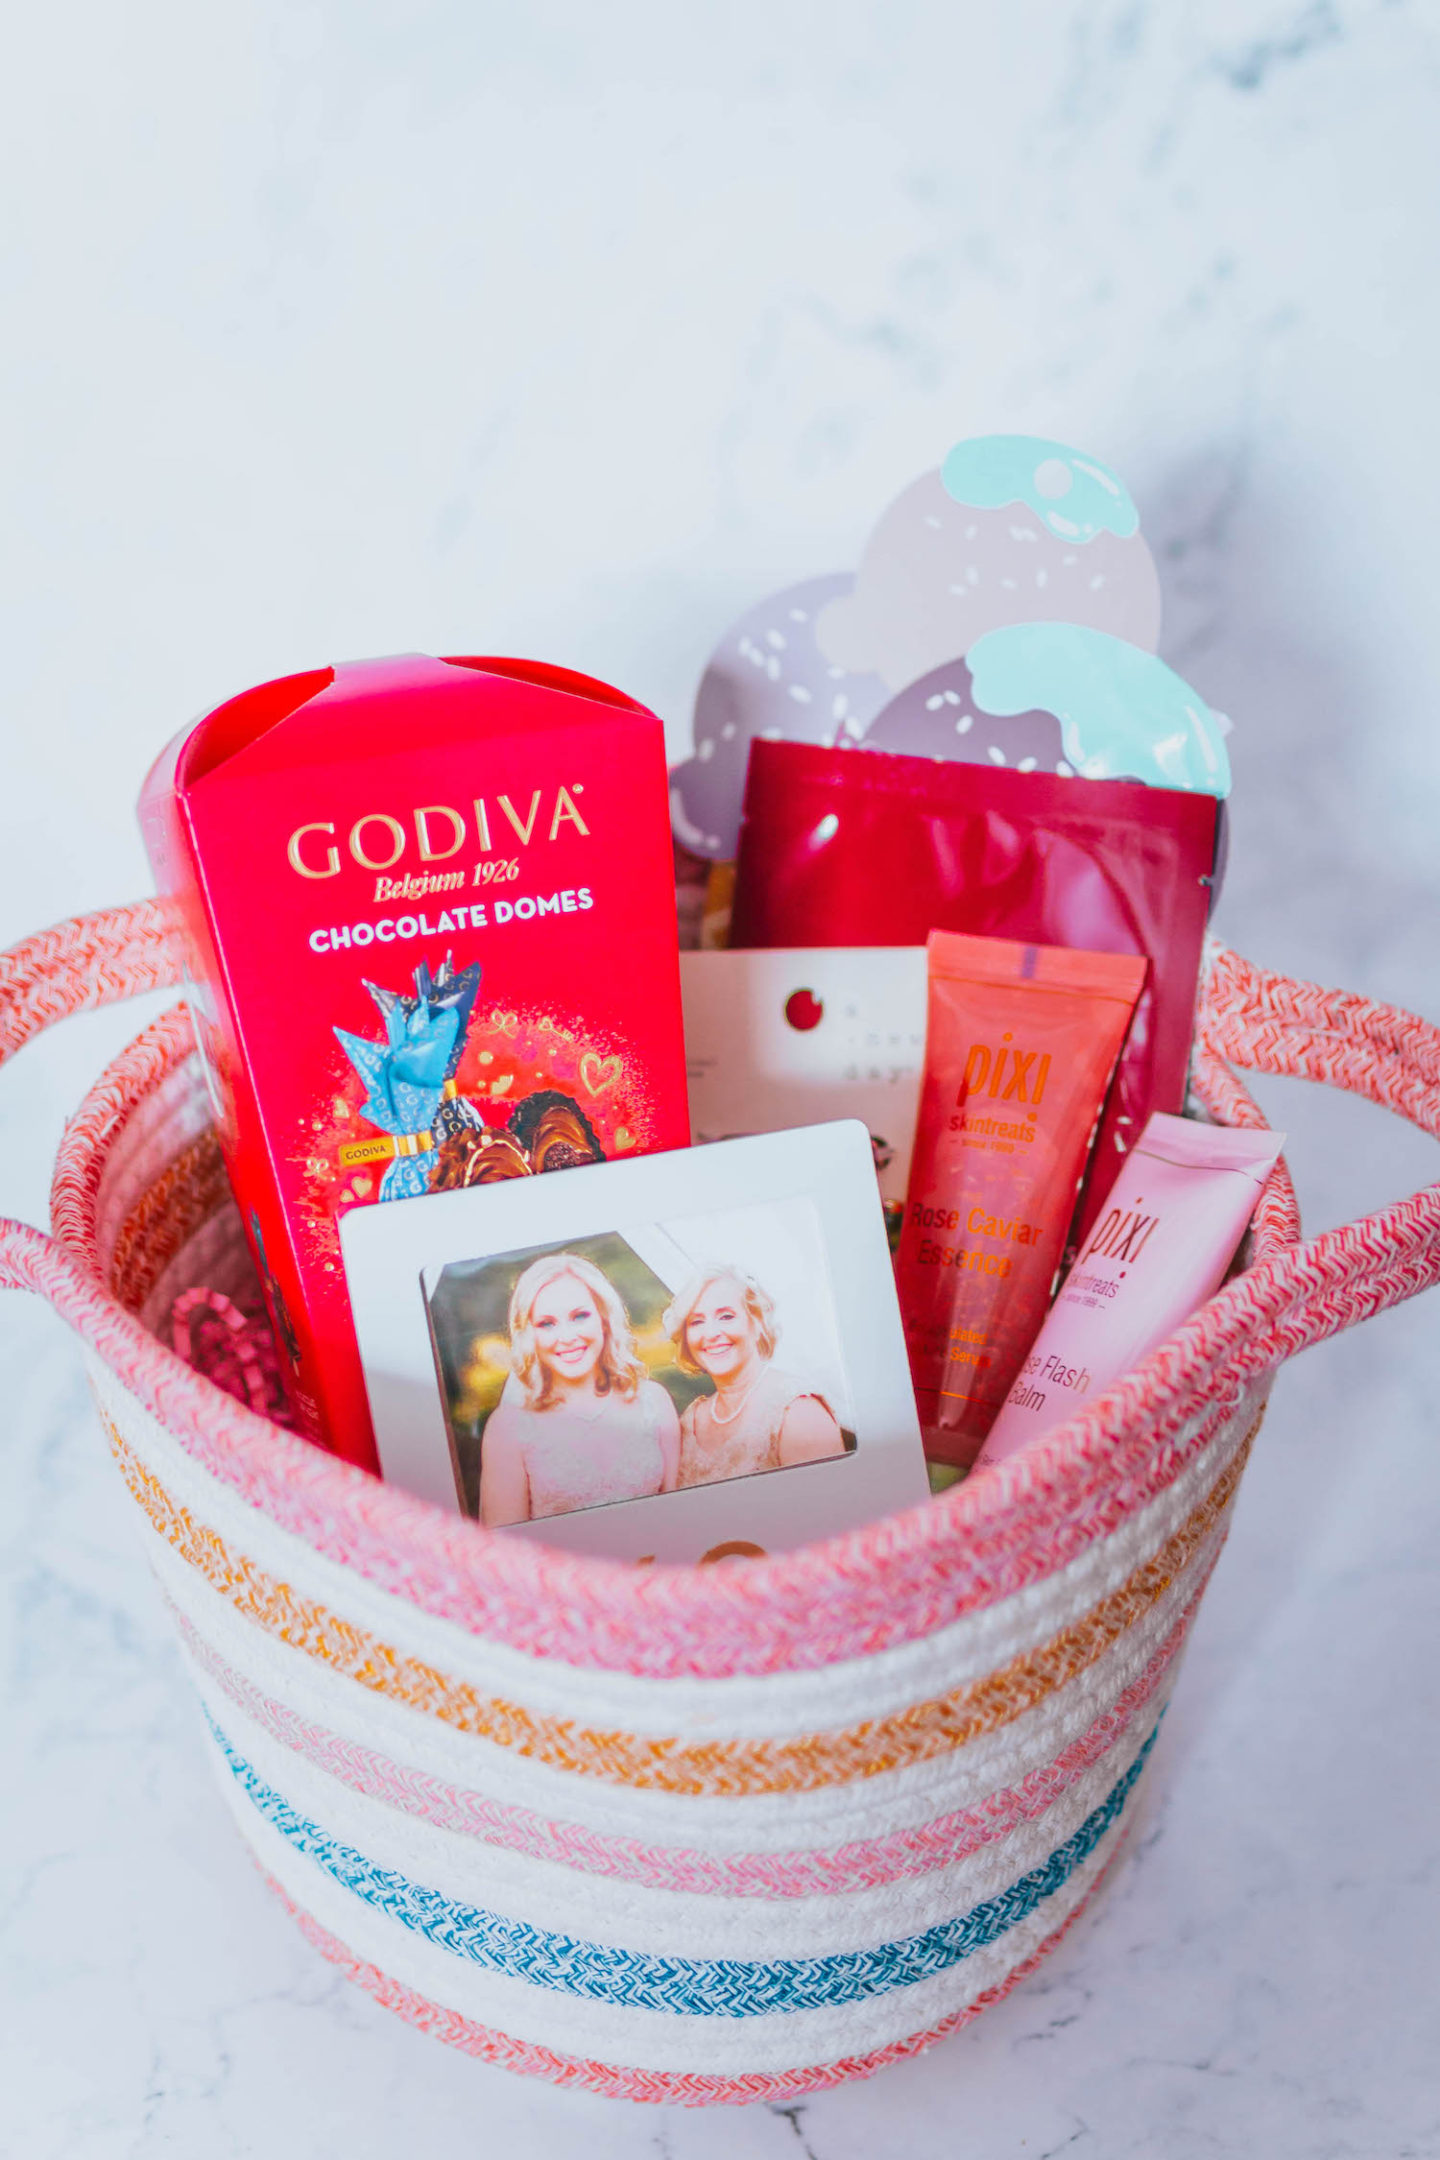 33 Best Mother's Day Gifts From Daughter Make Special Day